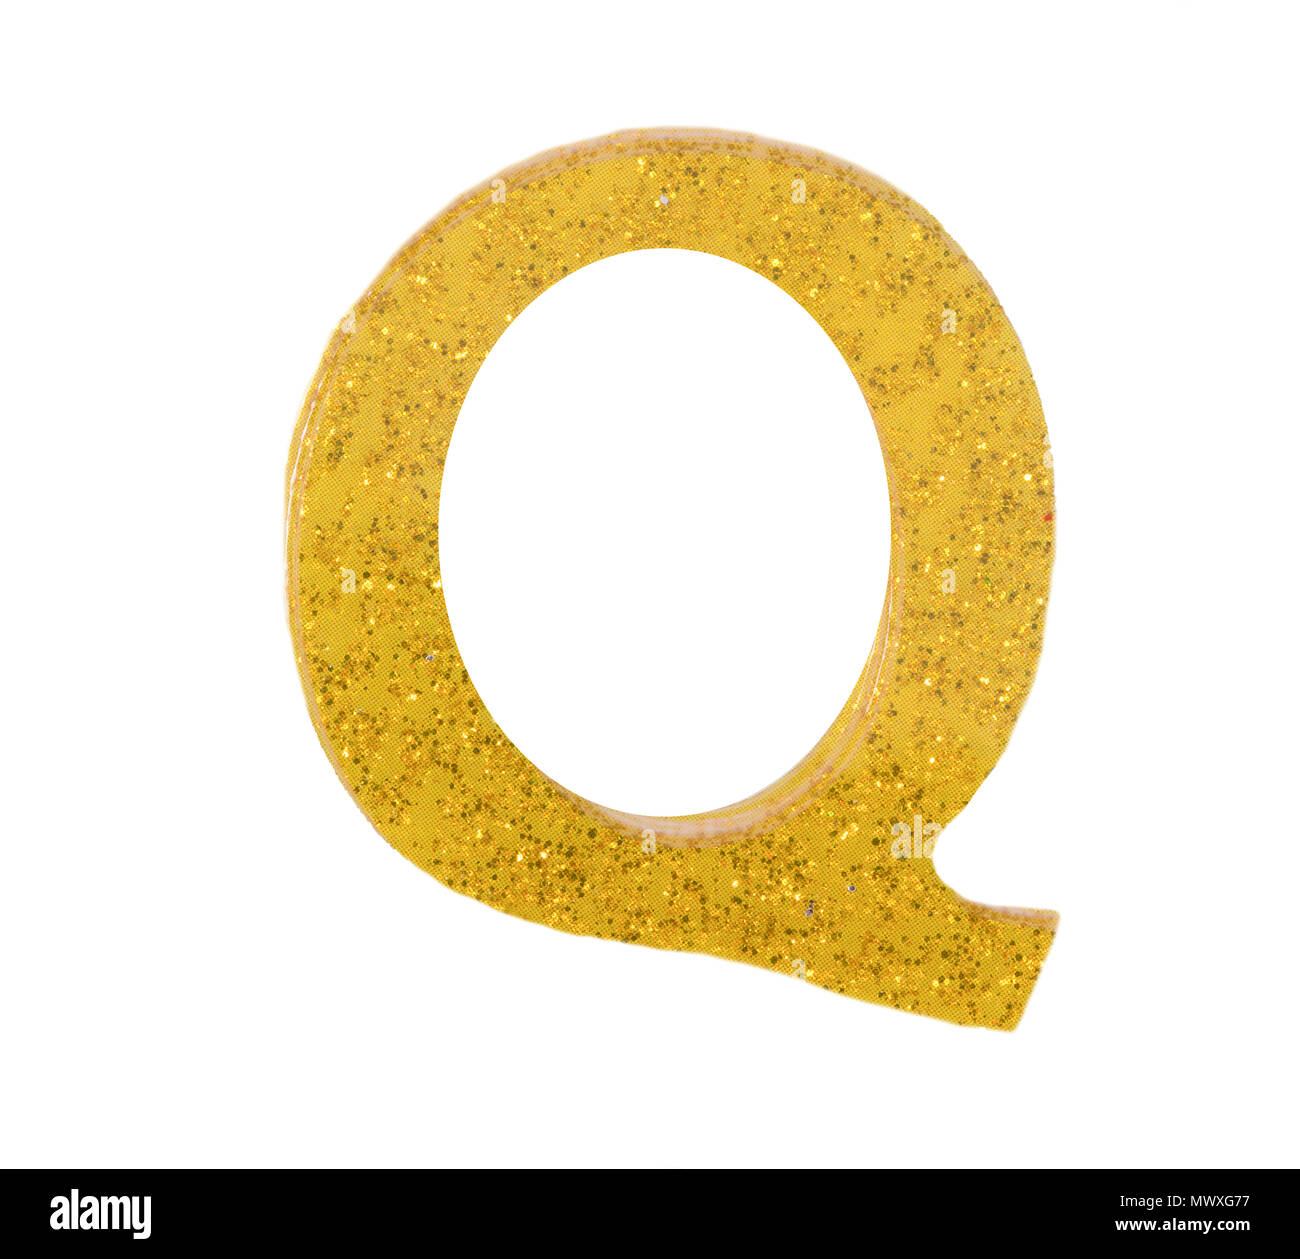 Letter Q alphabet symbol, English Letter, English alphabet from yellow (Golden)  on a white background with clipping path. Stock Photo